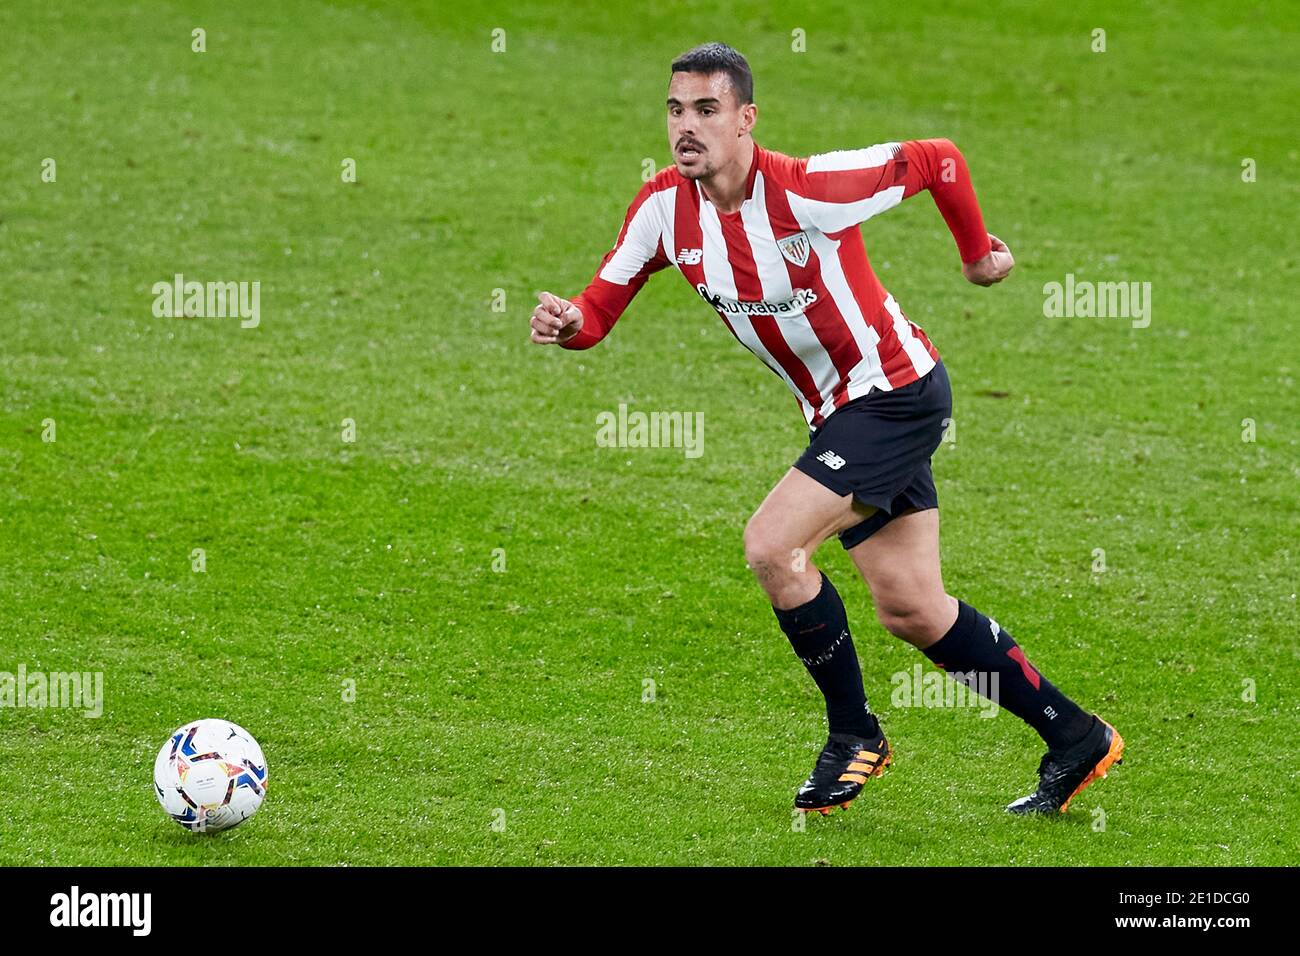 Bilbao, Spain. 06 January, 2021. Dani Garcia of Athletic Club in action during the La Liga match between Athletic Club Bilbao and FC Barcelona played at San Mames Stadium. Credit: Ion Alcoba/Capturasport/Alamy Live News Stock Photo